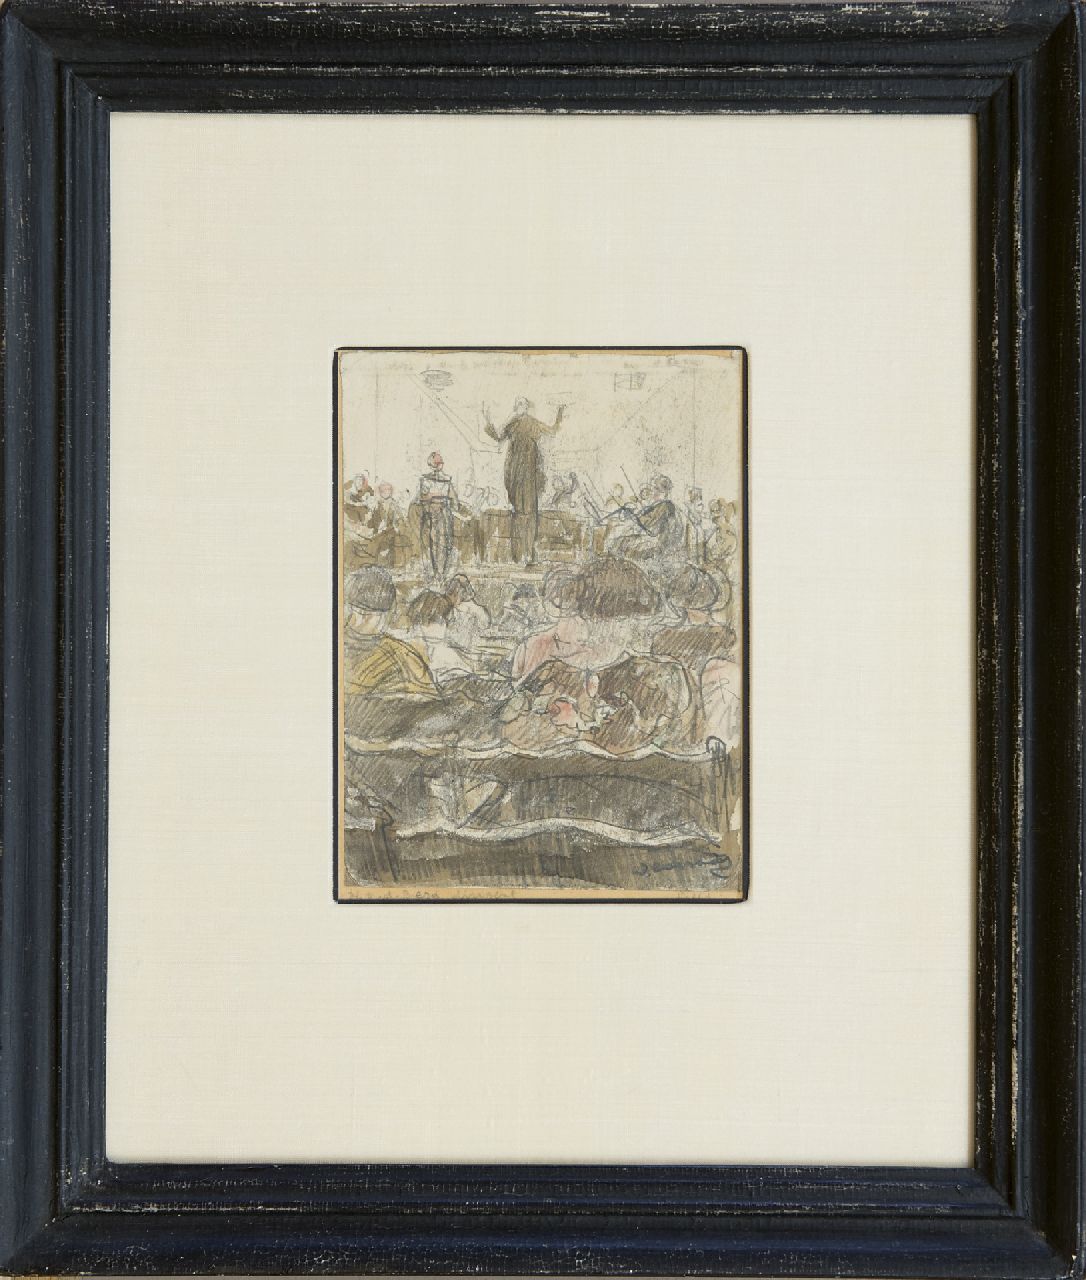 Cossaar J.C.W.  | Jacobus Cornelis Wyand 'Ko' Cossaar | Watercolours and drawings offered for sale | The conductor H. v.d. Berg leading a orchestra, drawing on paper 15.5 x 11.5 cm, signed l.r.